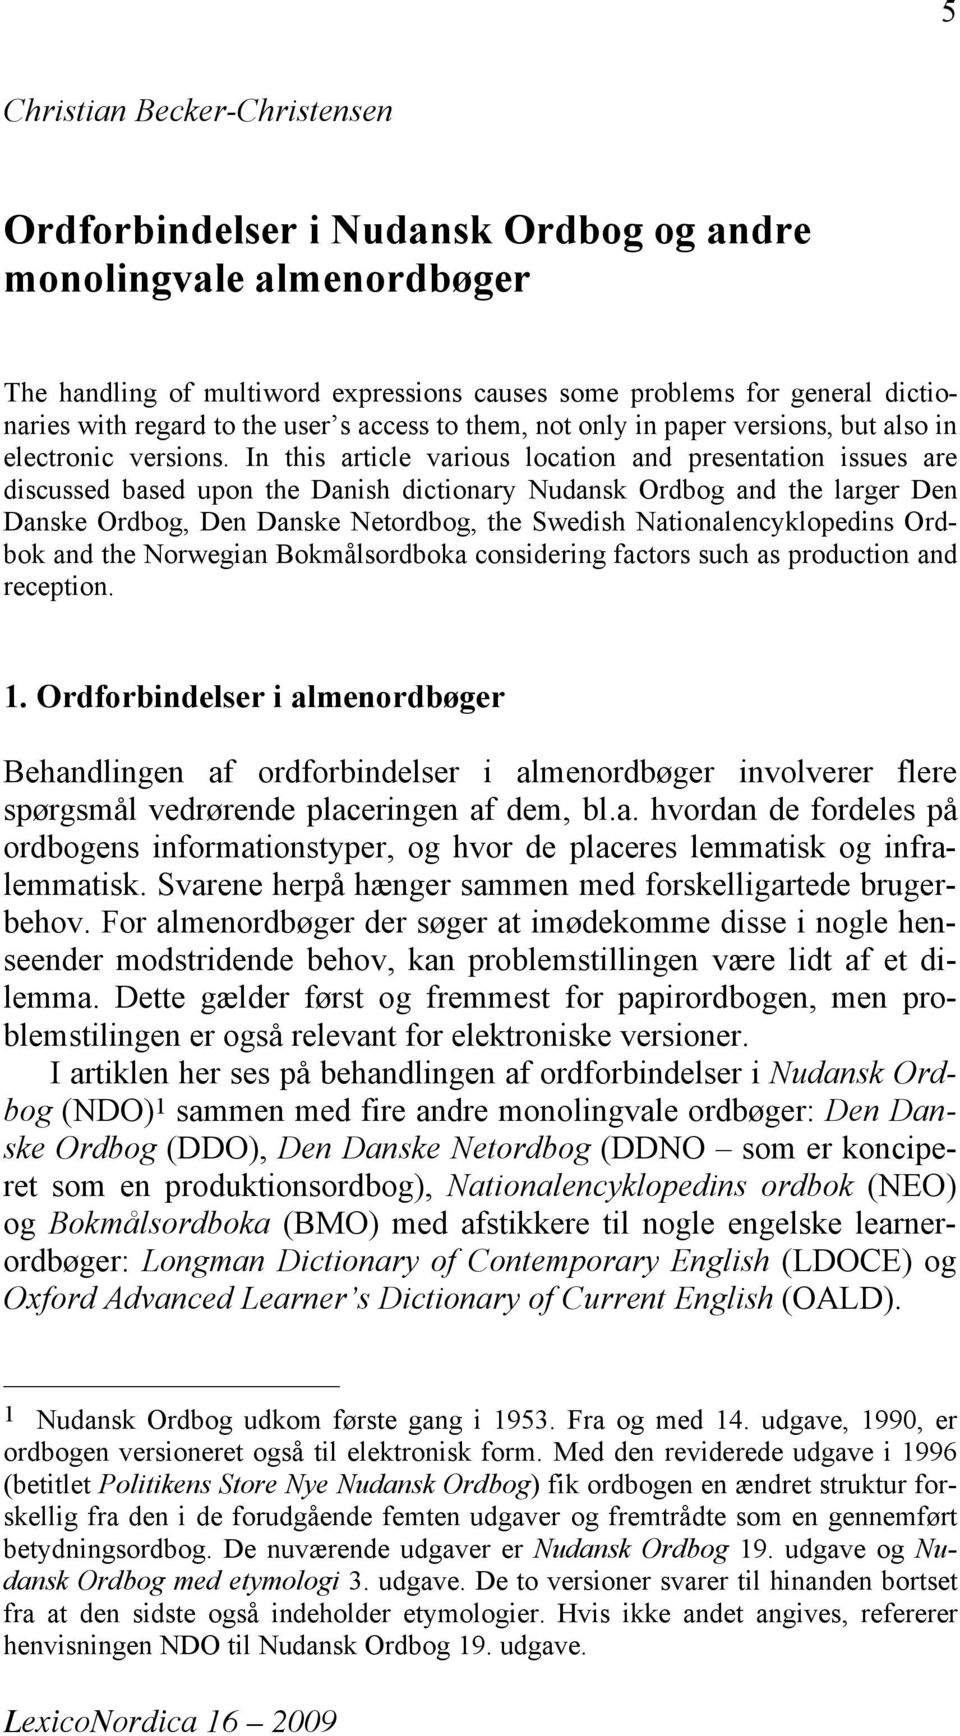 In this article various location and presentation issues are discussed based upon the Danish dictionary Nudansk Ordbog and the larger Den Danske Ordbog, Den Danske Netordbog, the Swedish